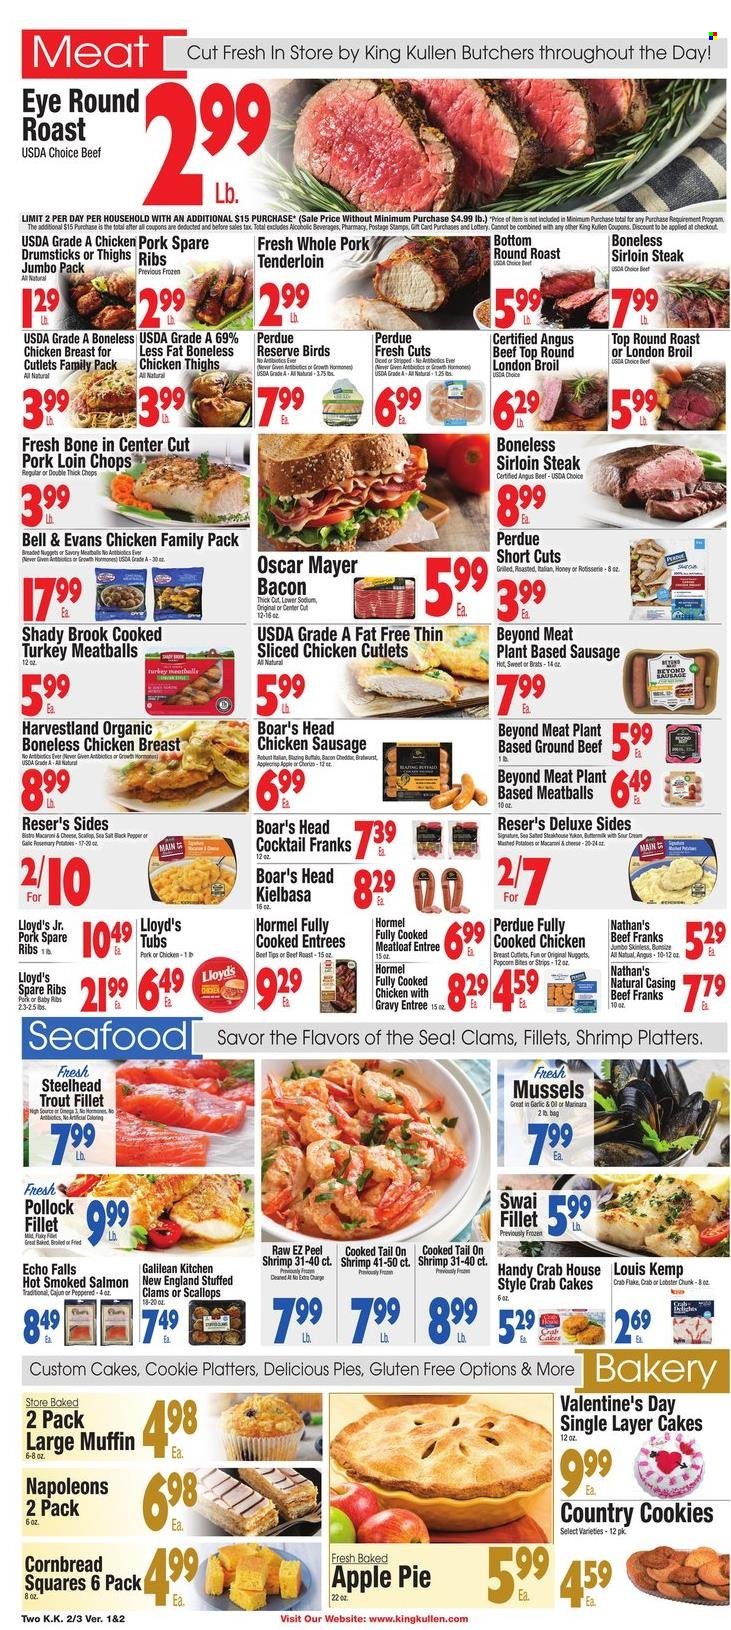 thumbnail - King Kullen Flyer - 02/03/2023 - 02/09/2023 - Sales products - pie, corn bread, apple pie, muffin, potatoes, clams, lobster, mussels, salmon, scallops, smoked salmon, trout, pollock, seafood, shrimps, swai fillet, crab cake, meatballs, nuggets, meatloaf, Perdue®, Hormel, bacon, Oscar Mayer, sausage, chicken sausage, kielbasa, buttermilk, strips, cookies, popcorn, sea salt, chicken cutlets, chicken thighs, beef meat, beef sirloin, ground beef, steak, round roast, roast beef, sirloin steak, ribs, pork chops, pork loin, pork meat, pork ribs, pork tenderloin, pork spare ribs, Omega-3. Page 2.